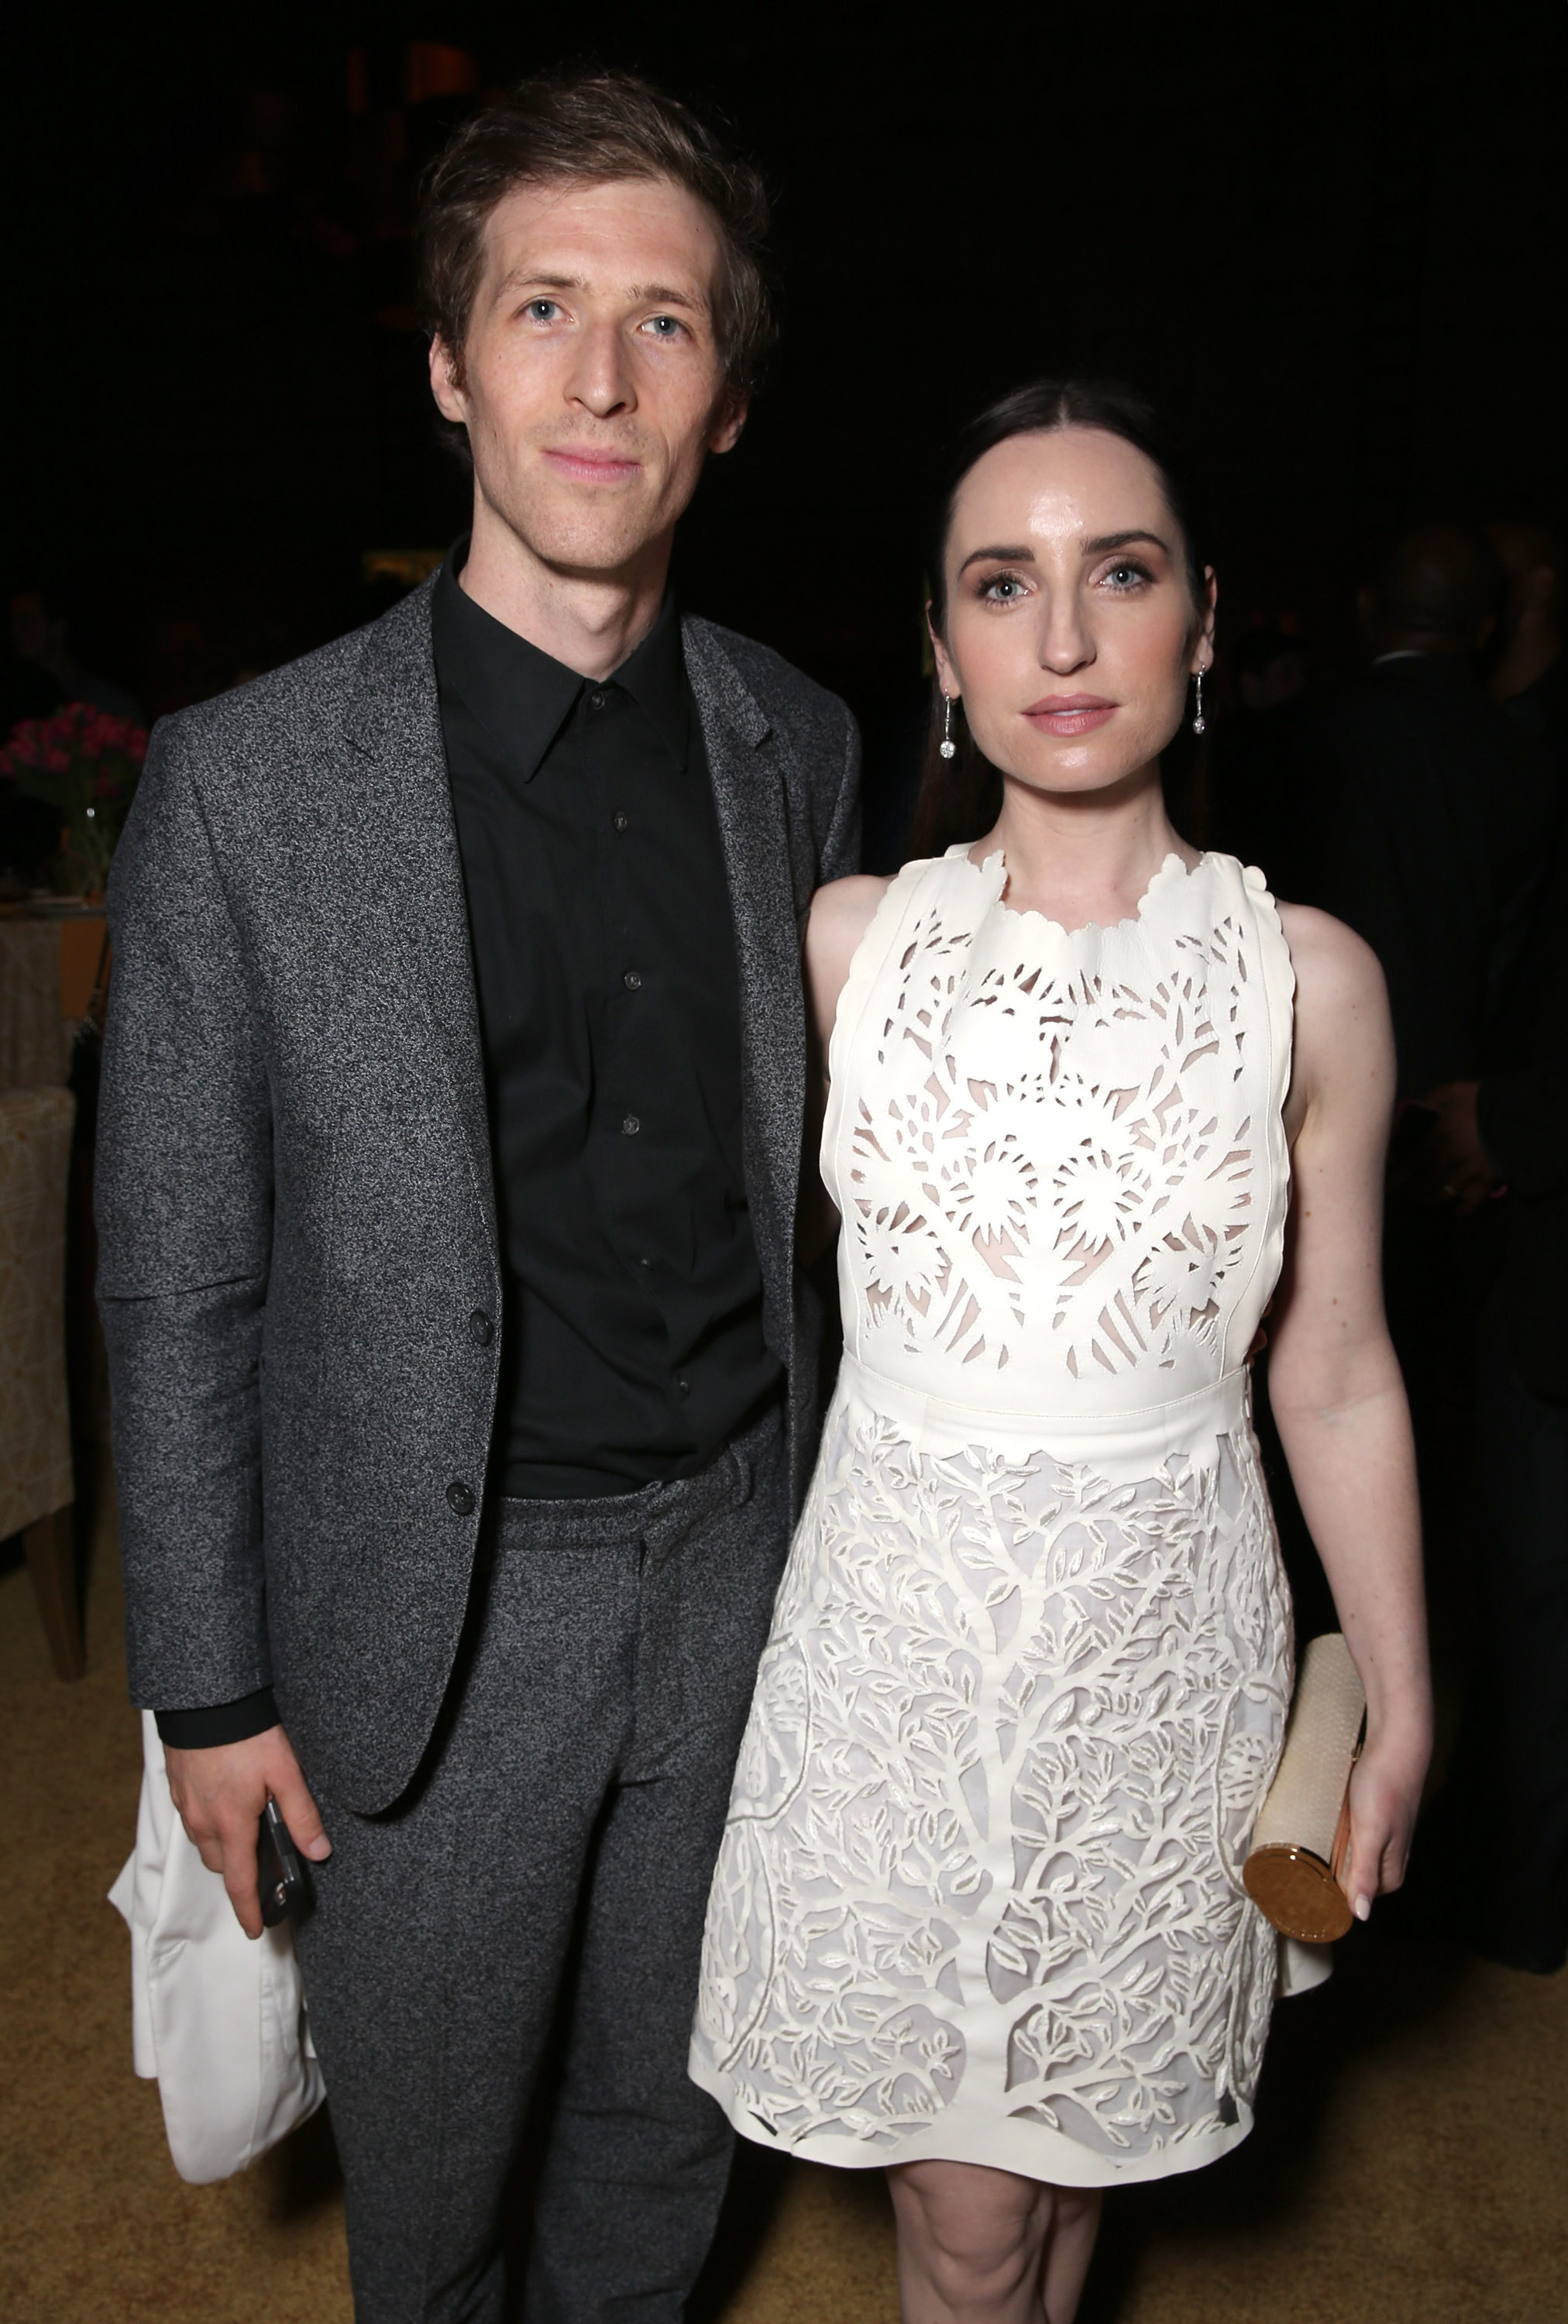 Daryl Wein and Zoe Lister-Jones at the after party for the premiere of HBO Films' "Confirmation" on March 31, 2016, in California | Source: Getty Images